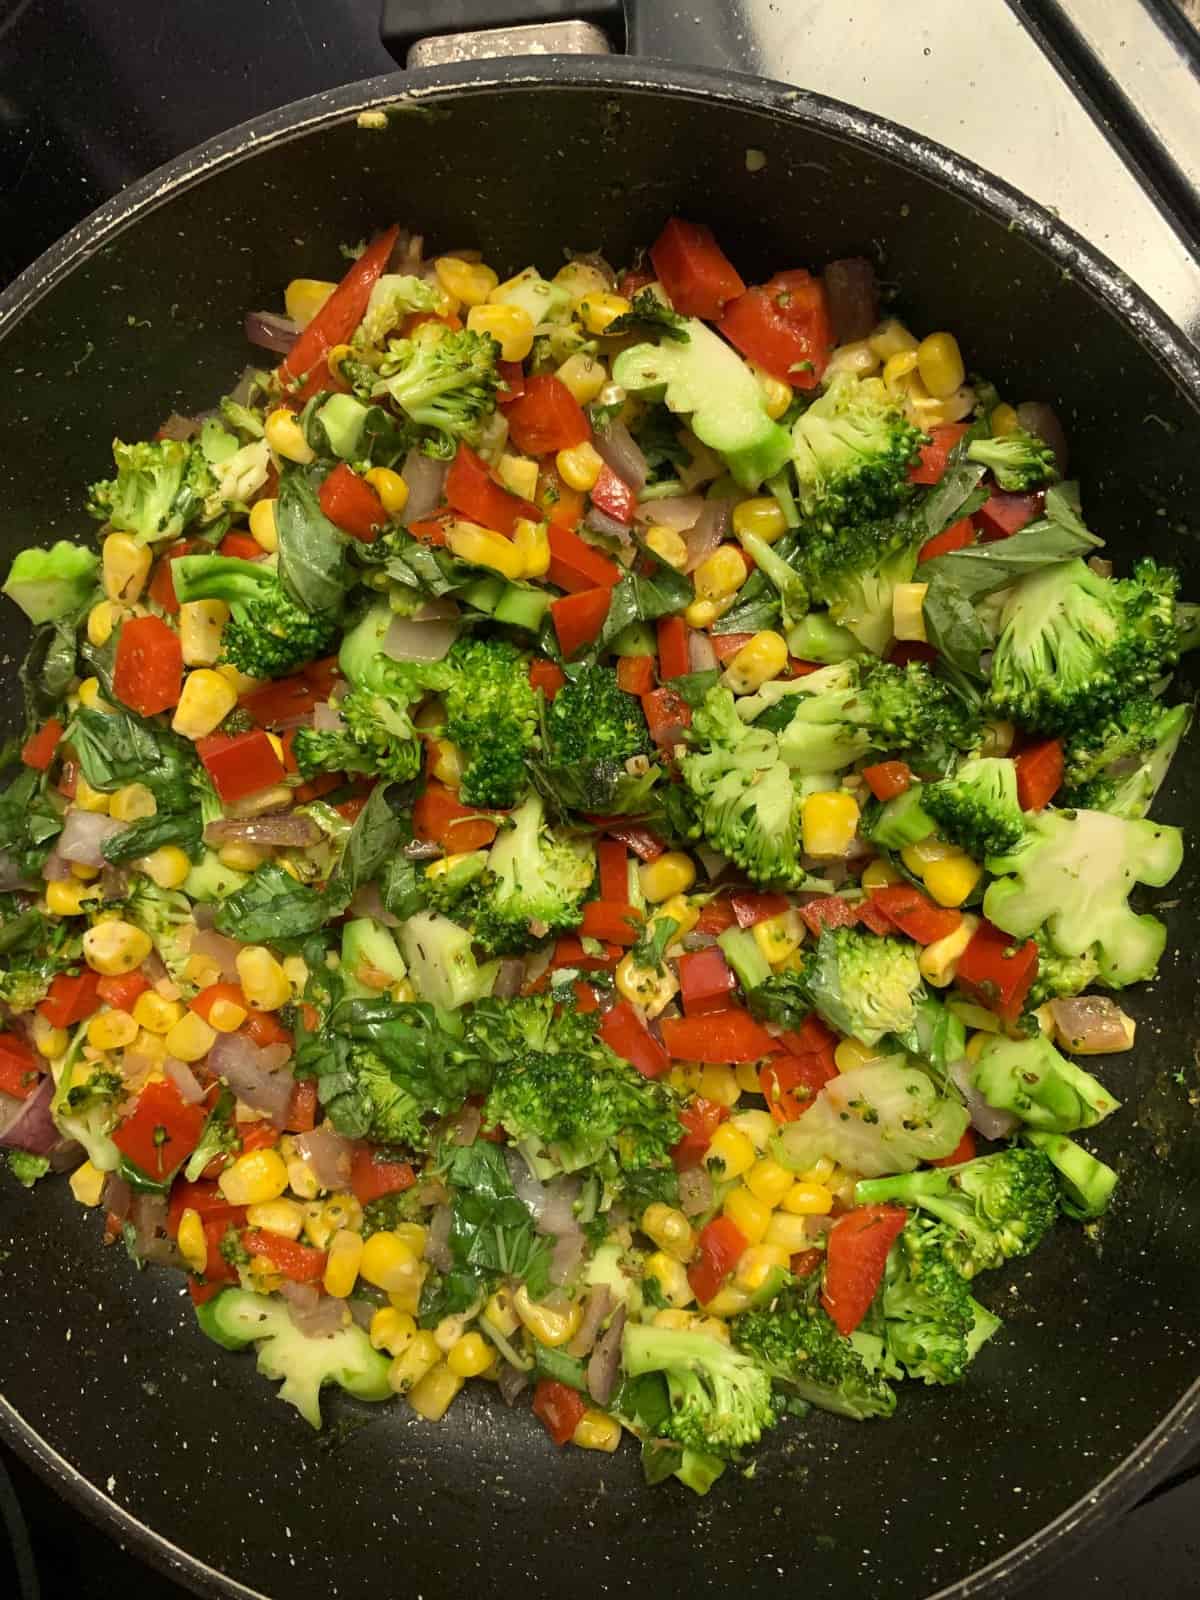 Mixed veggies like broccoli, peppers and corn in a pan